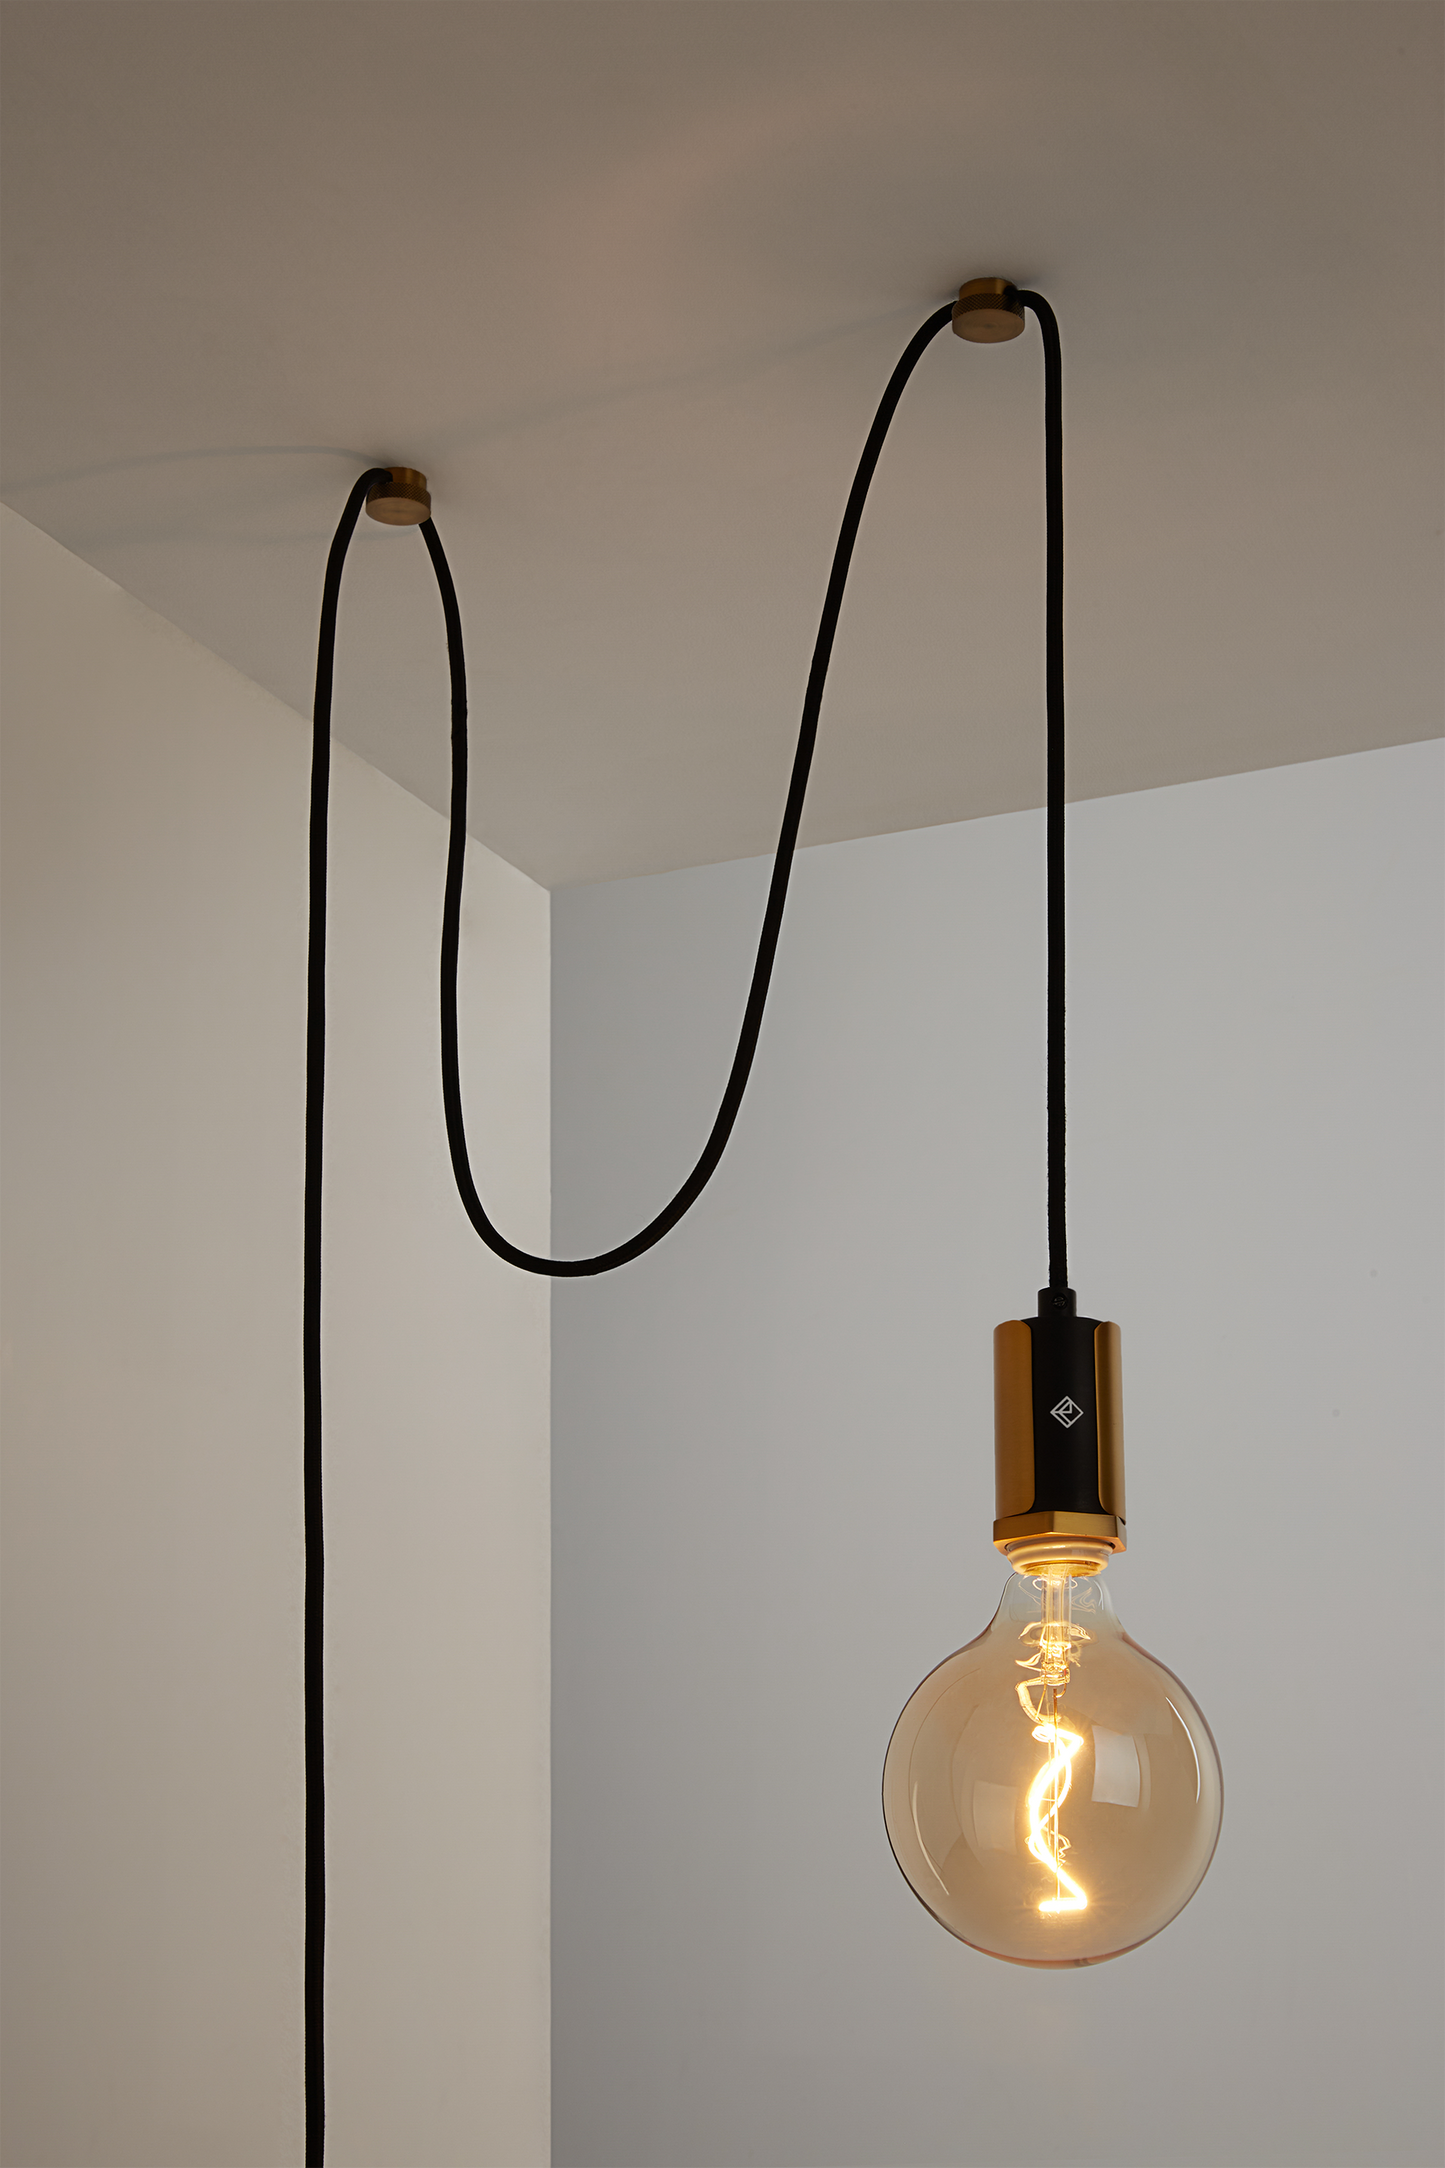 The Alamere Plug-In Pendant is the ideal swag kit lamp for any space. Easy to install, it plugs into any standard wall outlet and comes with two cord anchors to hang it anywhere. An inline dimmer on the cord allows for adjustability with any compatible dimming light bulb.